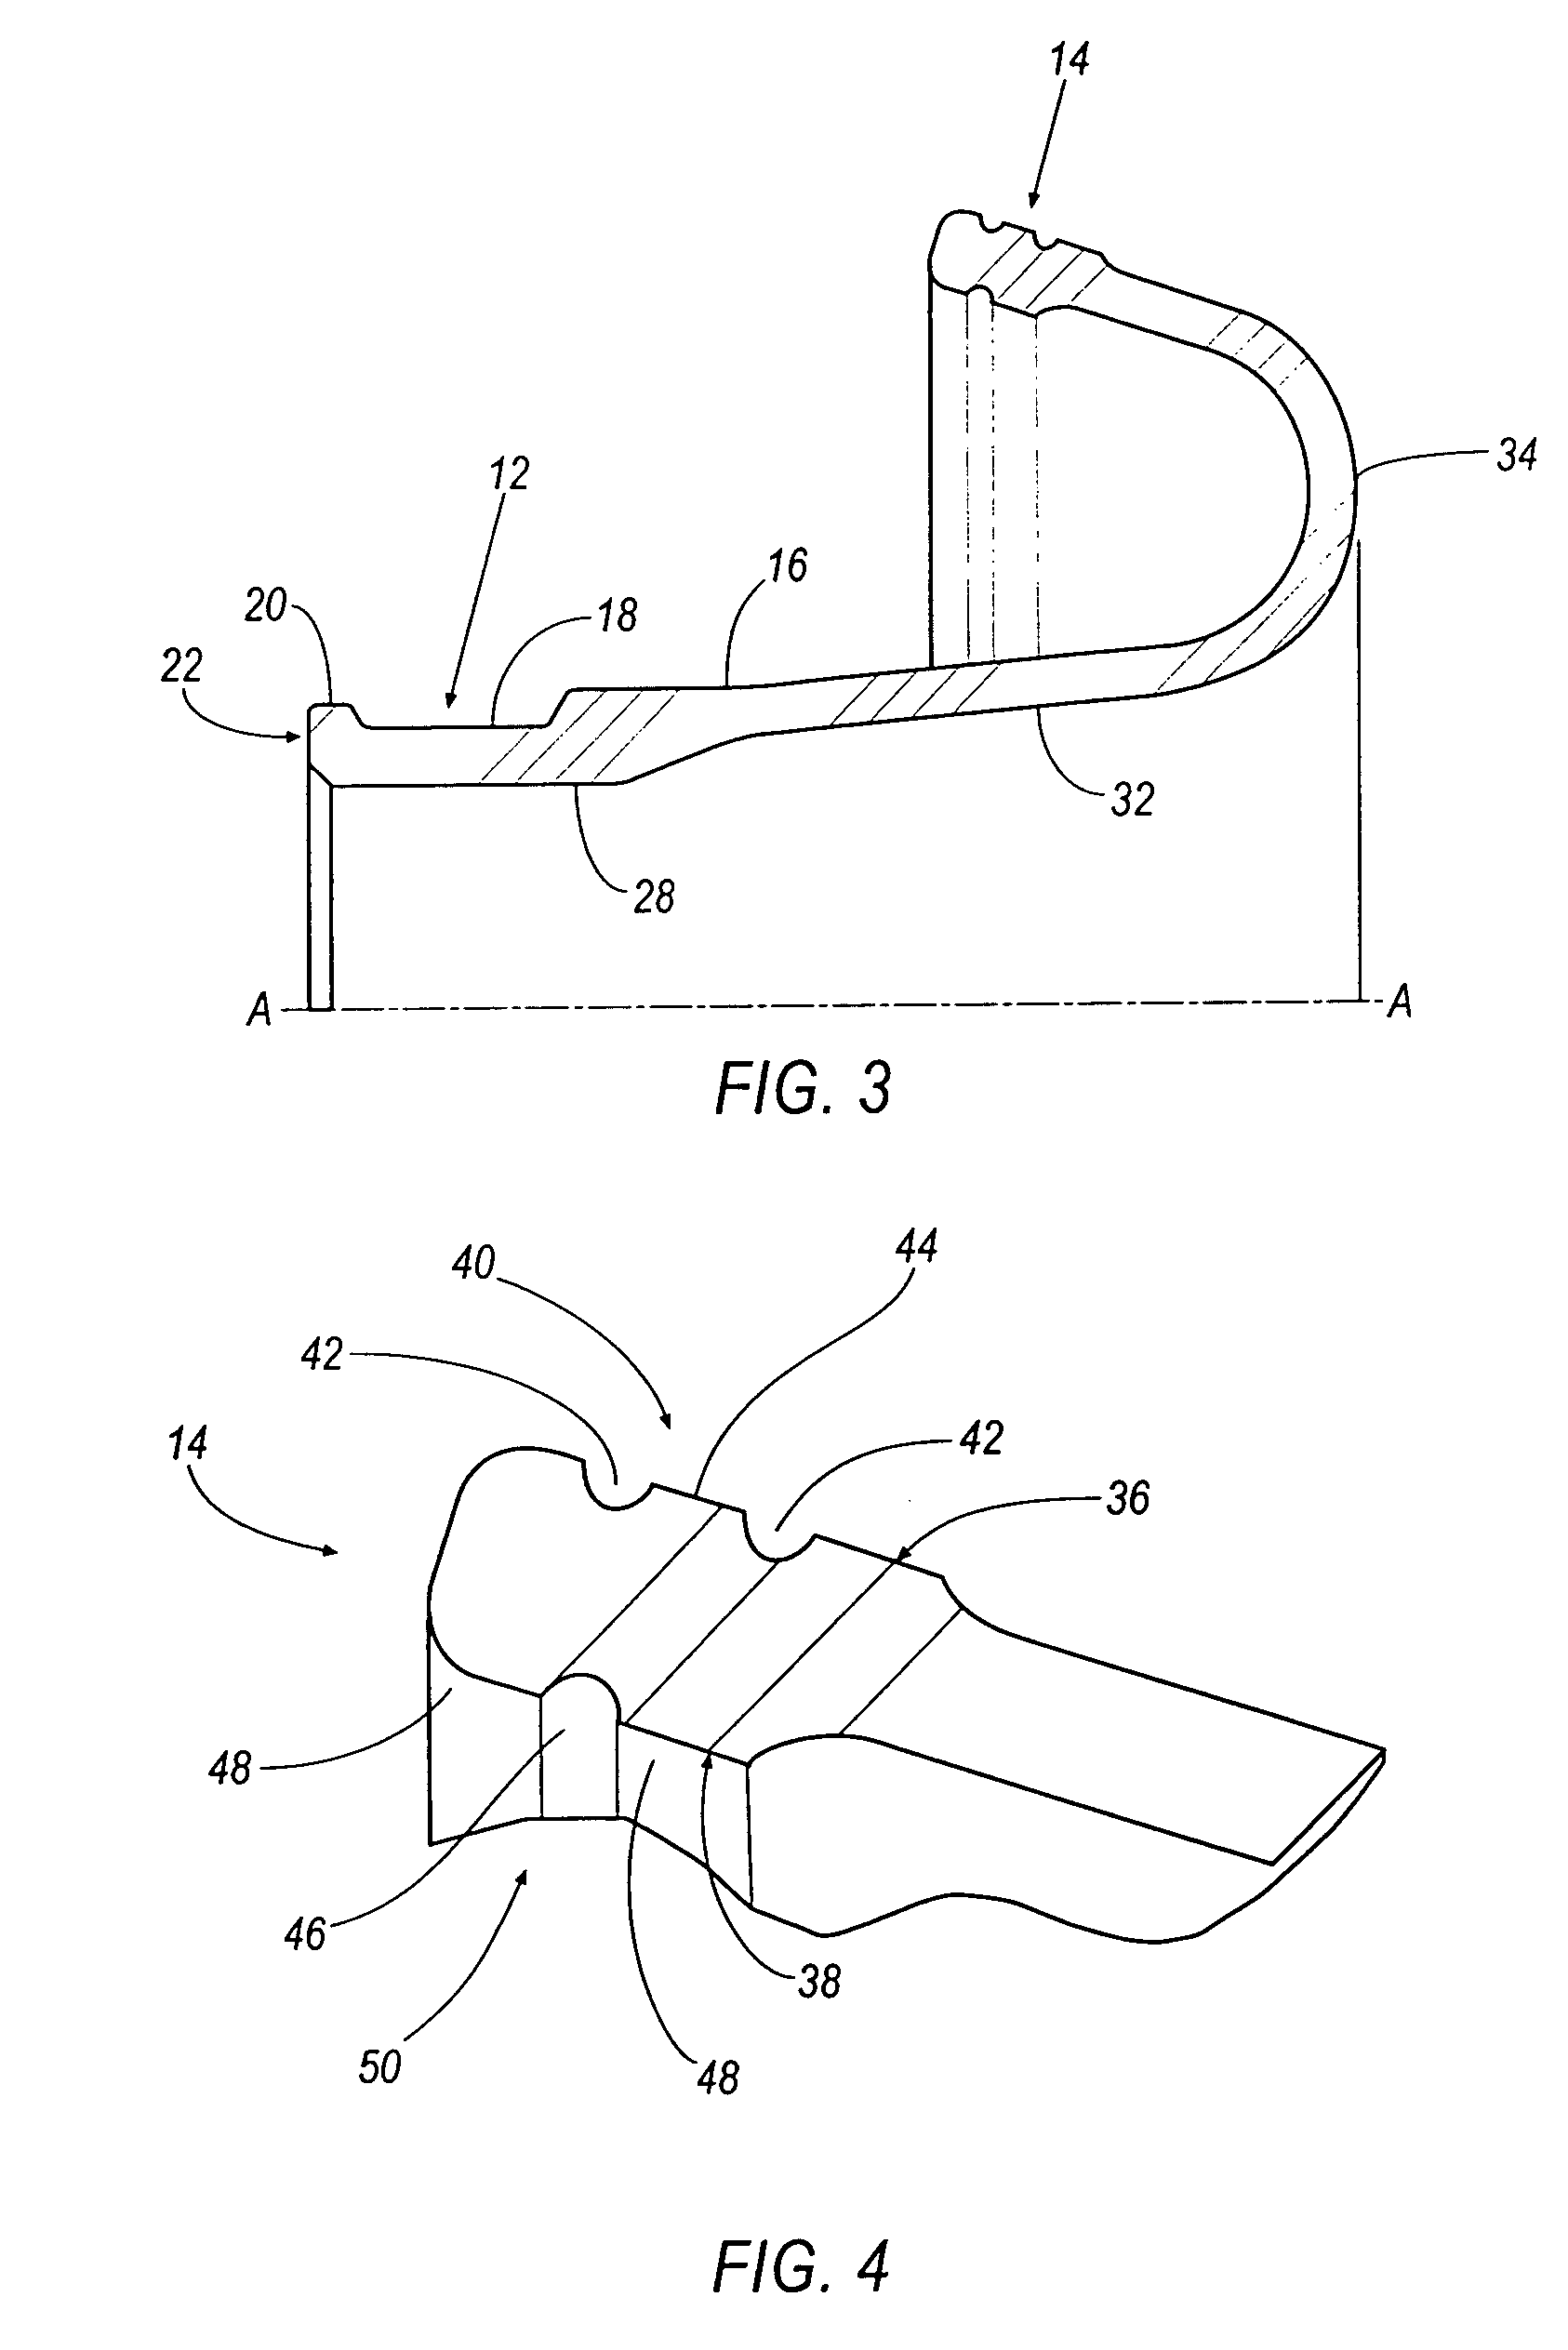 Automotive driveline components manufactured of hydrogenated nitrile butadiene rubber material